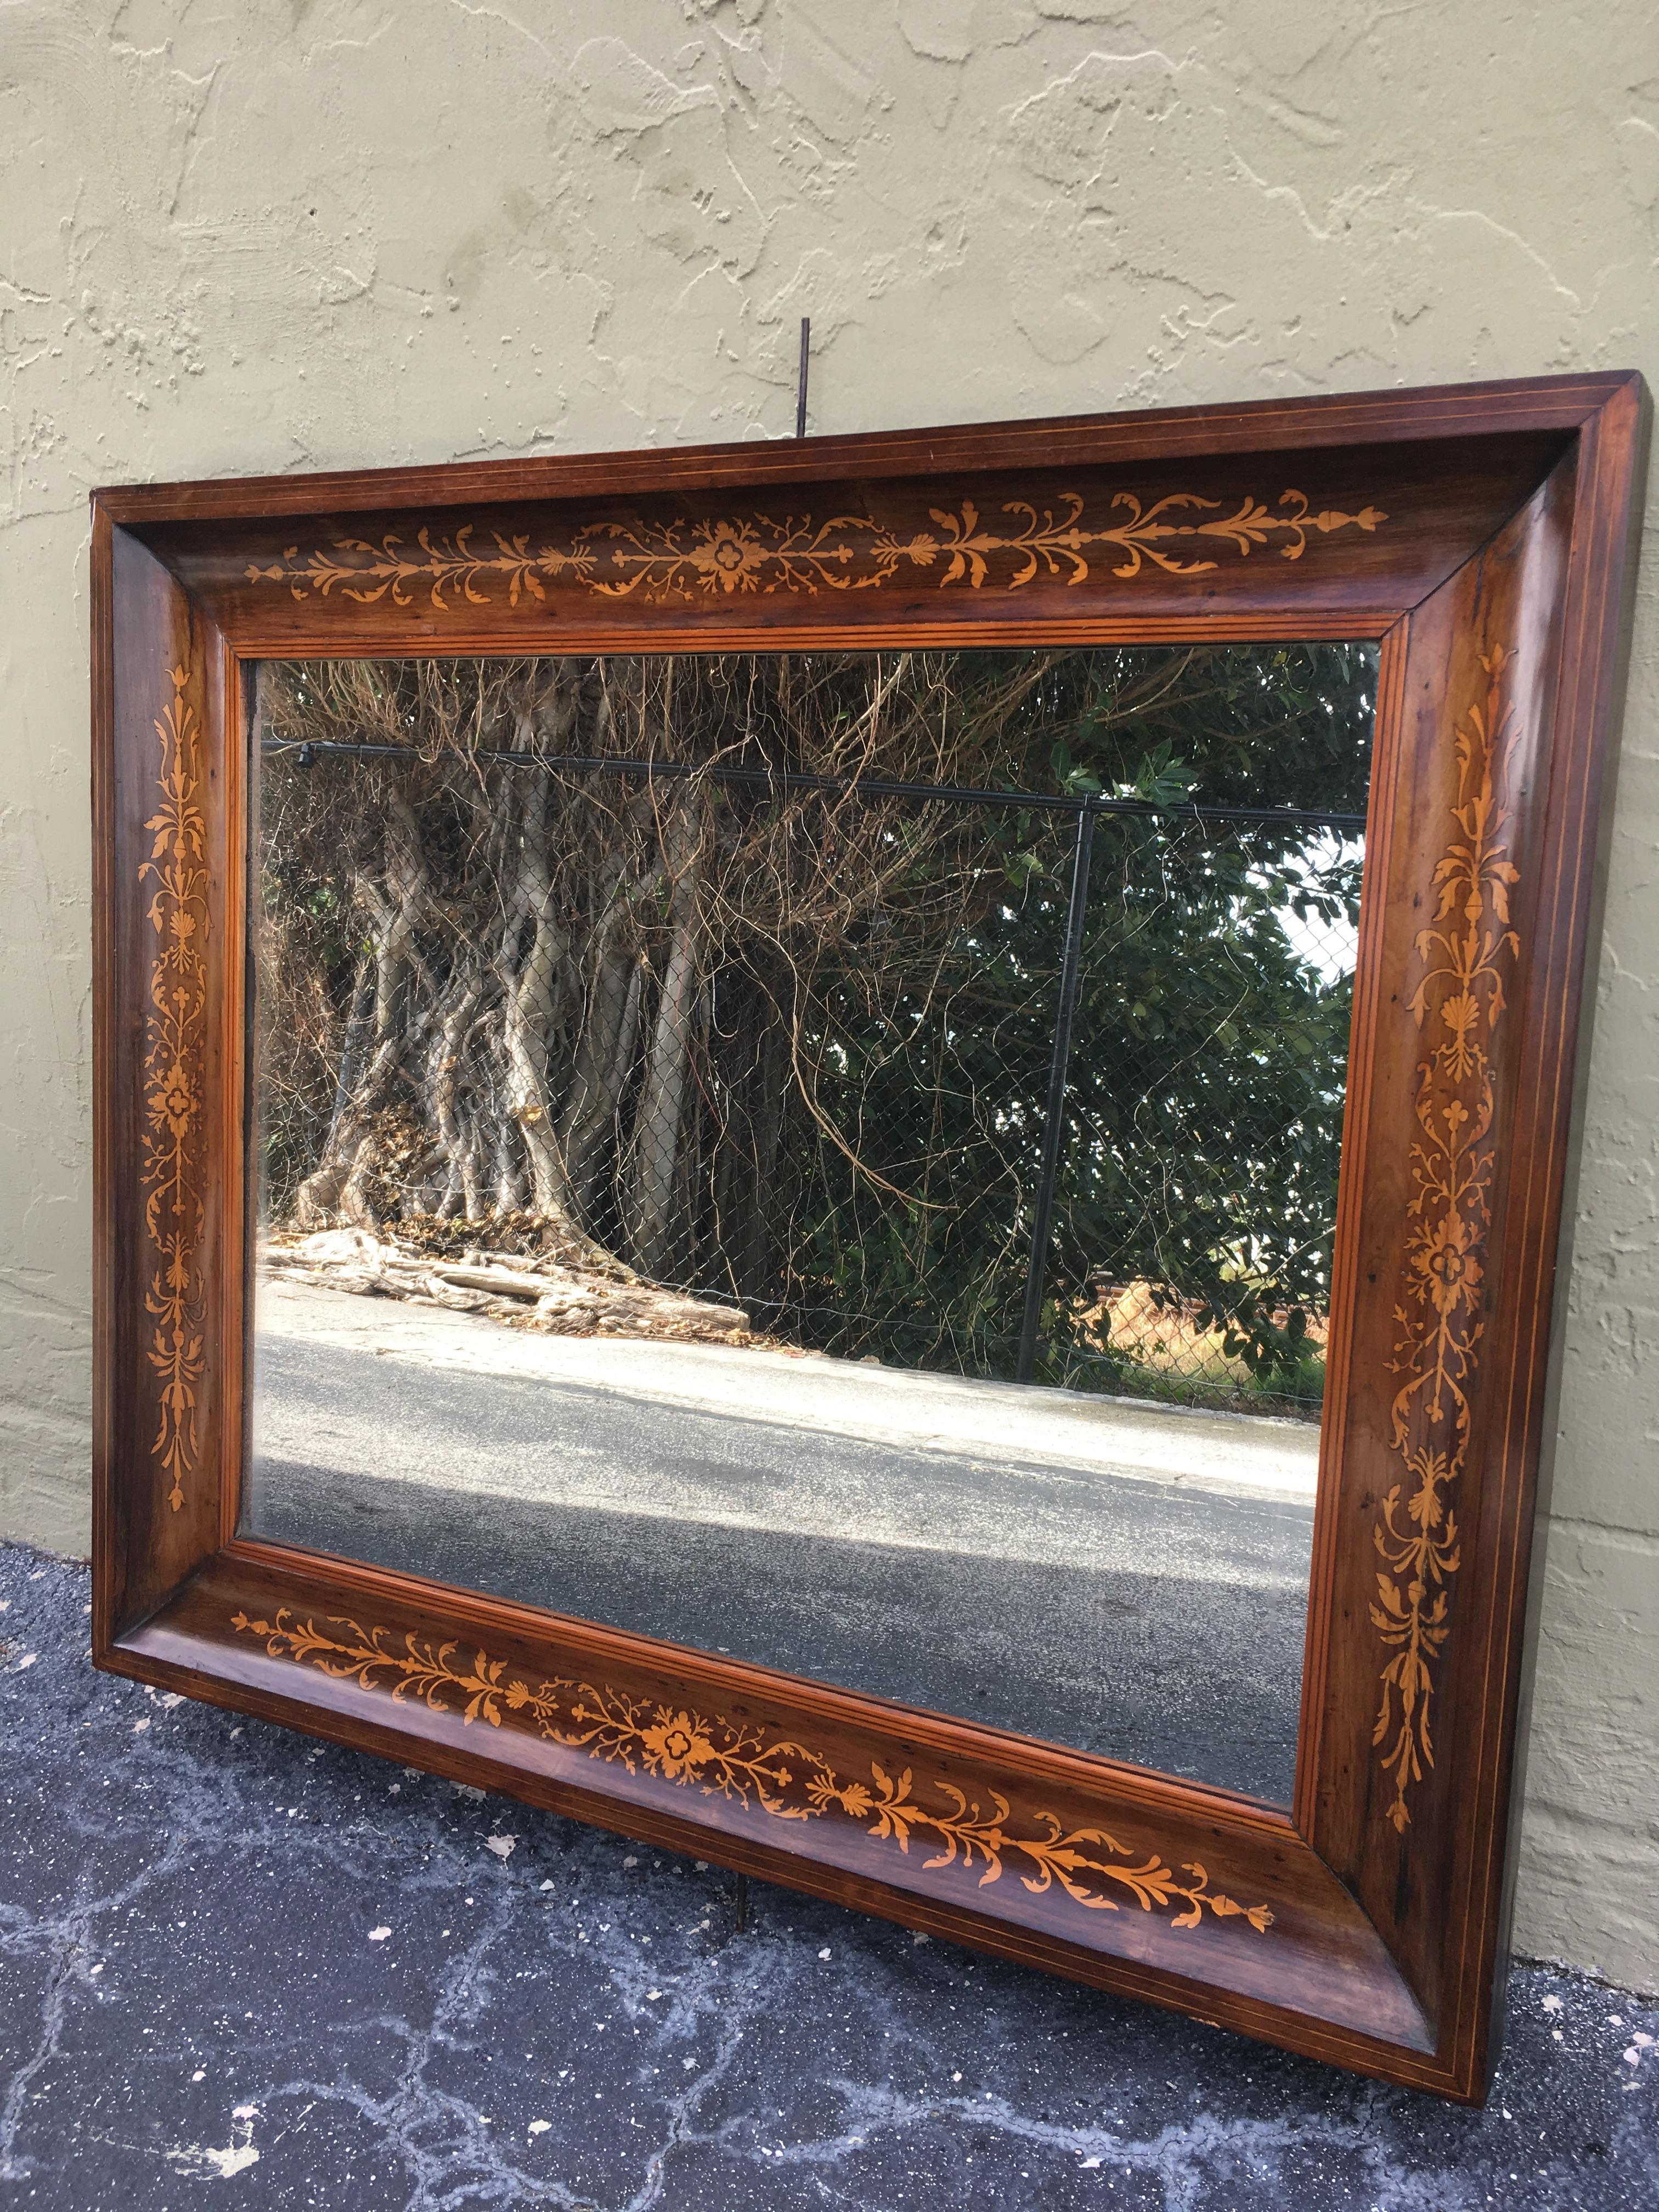 About
This is a beautiful antique Spanish flame mahogany and marquetry wall mirror, circa 1840 .

The mahogany frame is beautifully inlaid with a continuous marquetry border.

The quality and craftsmanship of this stunning piece is absolutely